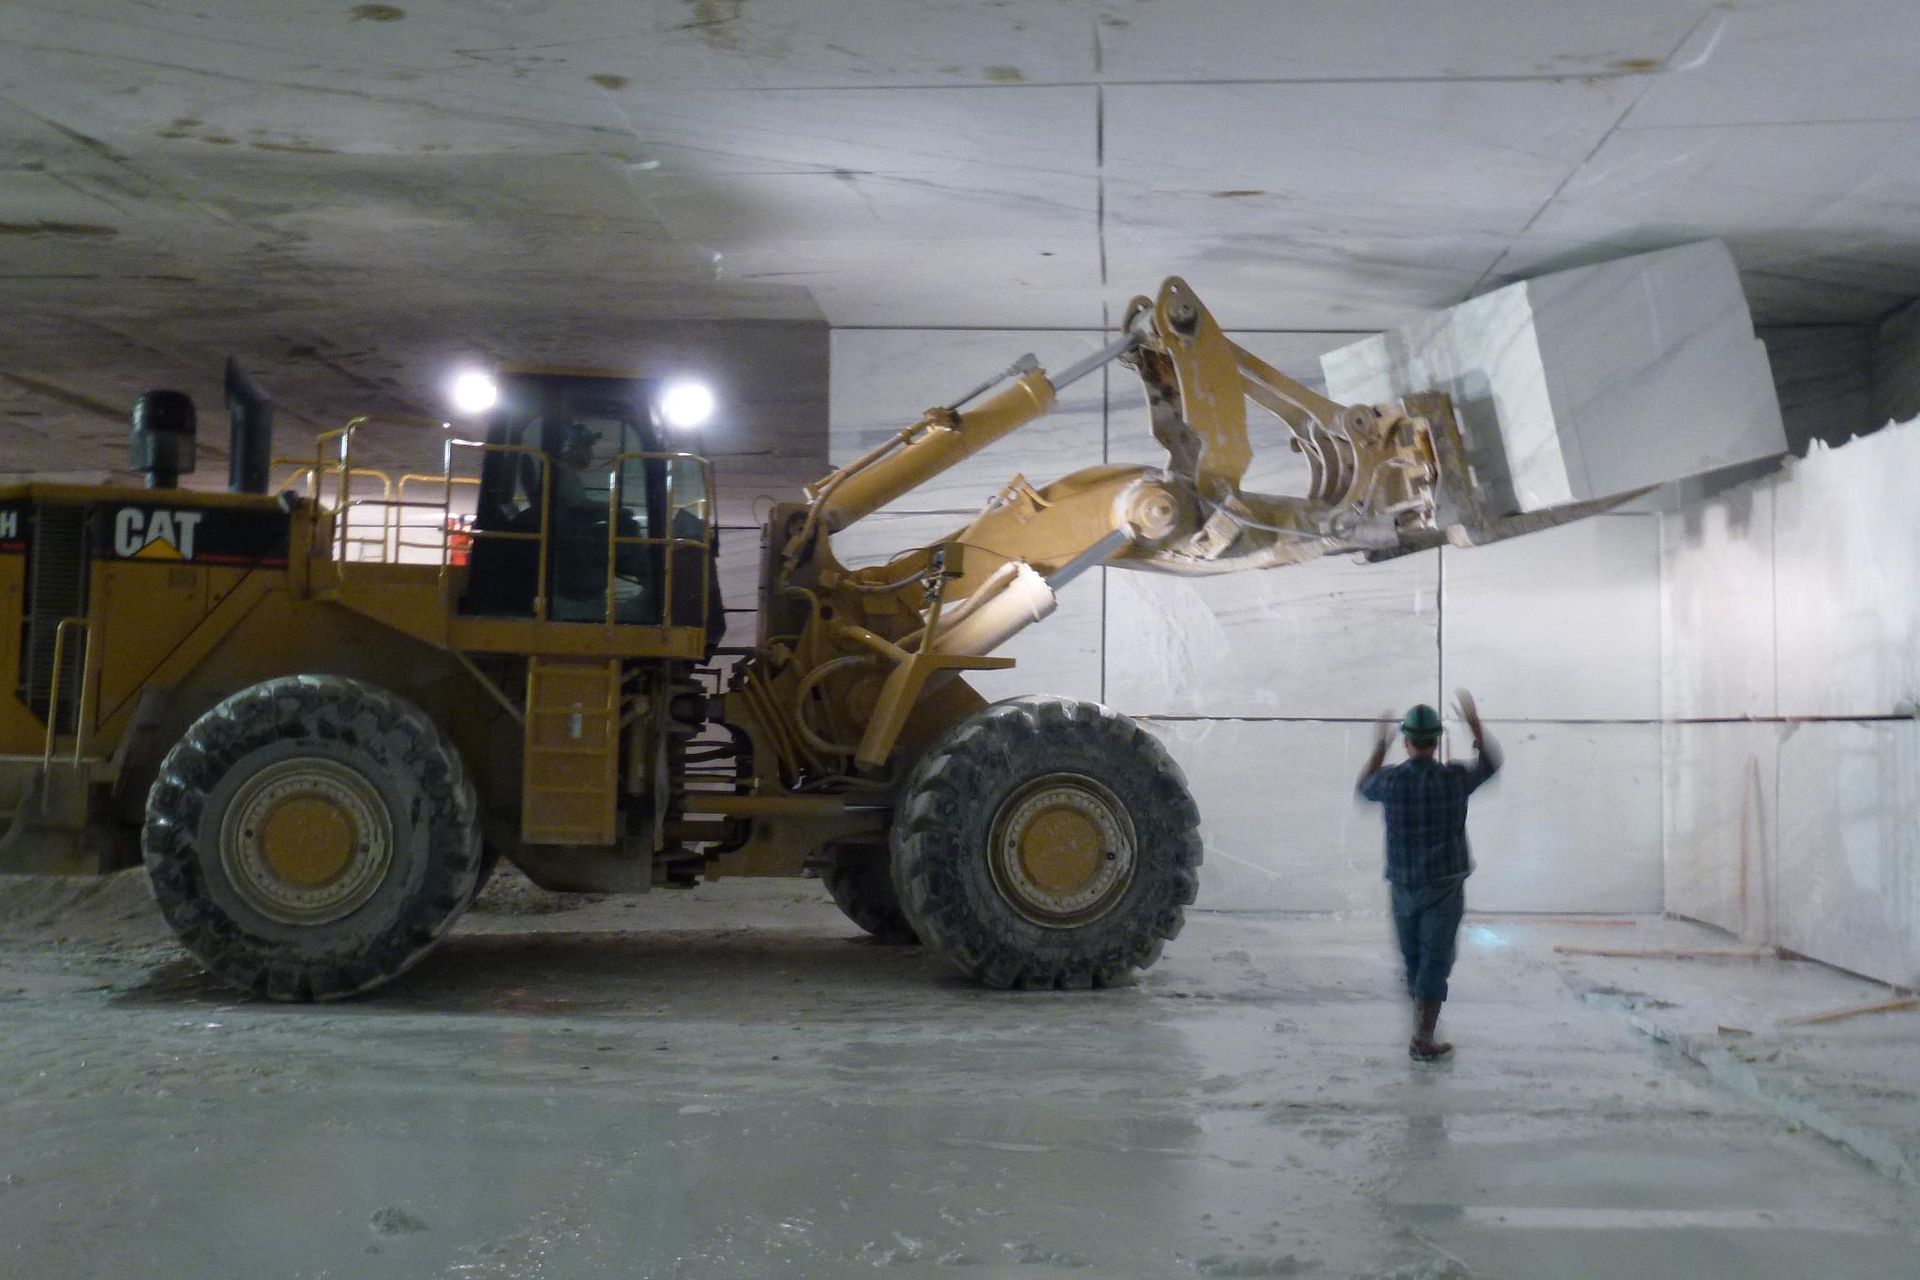 World's Largest Underground Marble Quarry, world record in Danby, Vermont